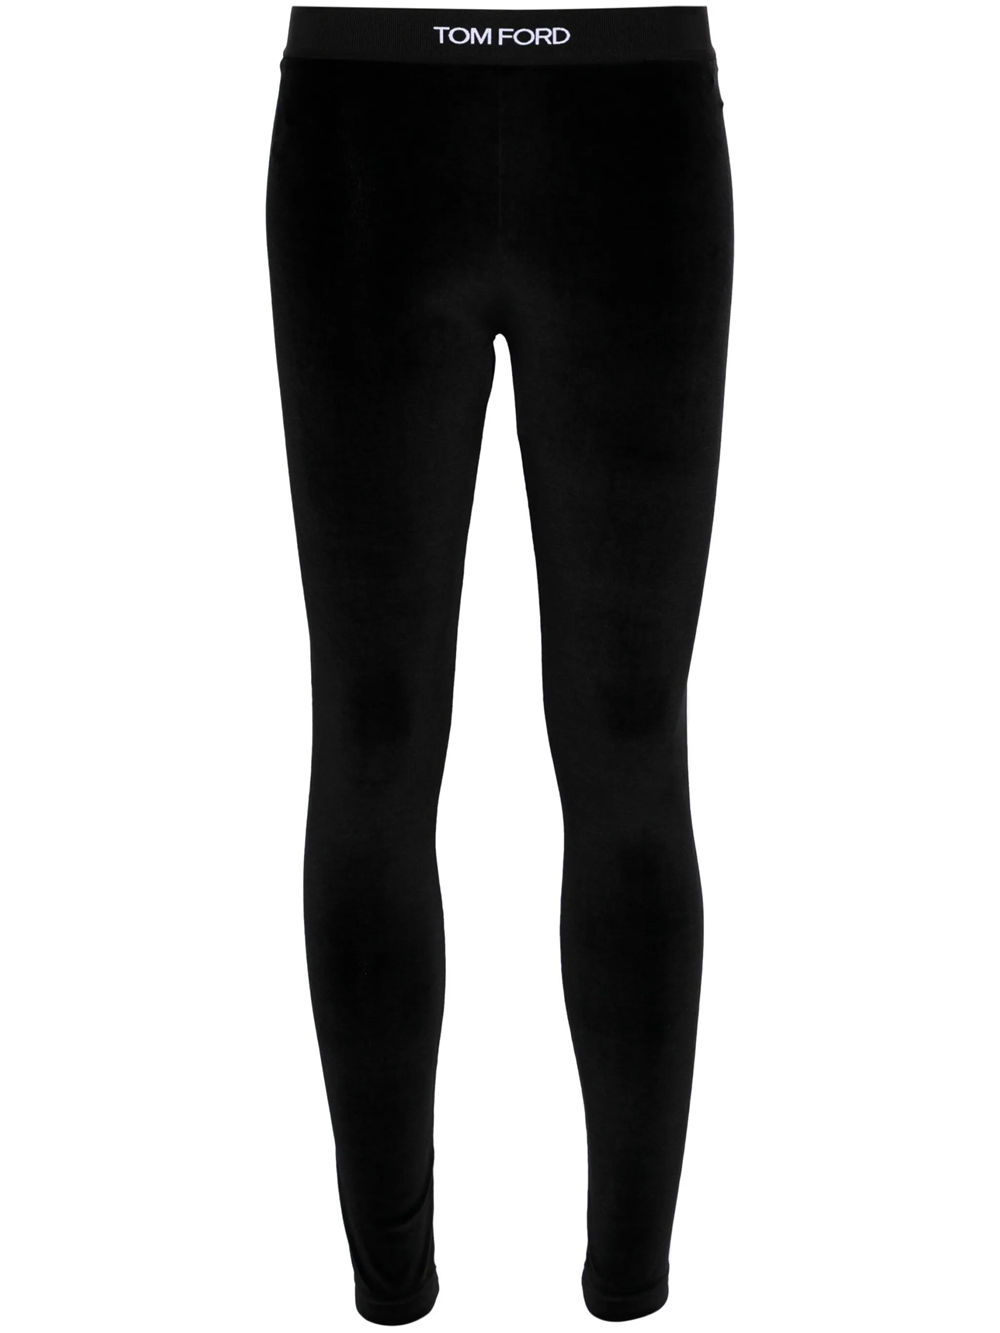 TOM FORD LEGGINGS WITH LOGO BAND